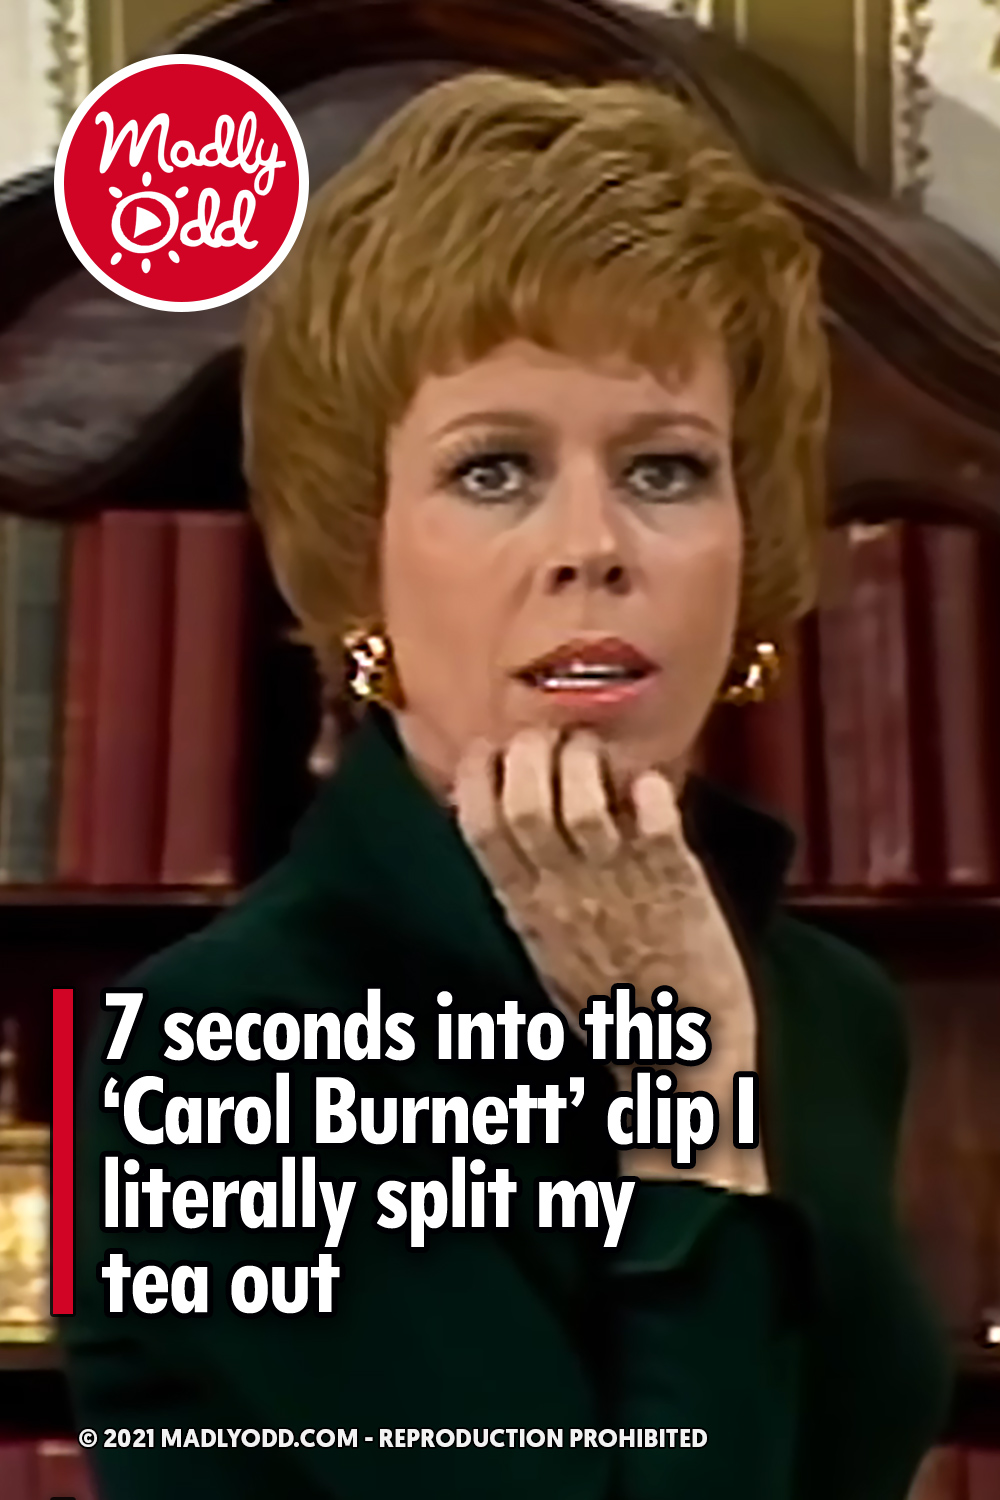 7 seconds into this ‘Carol Burnett’ clip I literally spilled my tea out